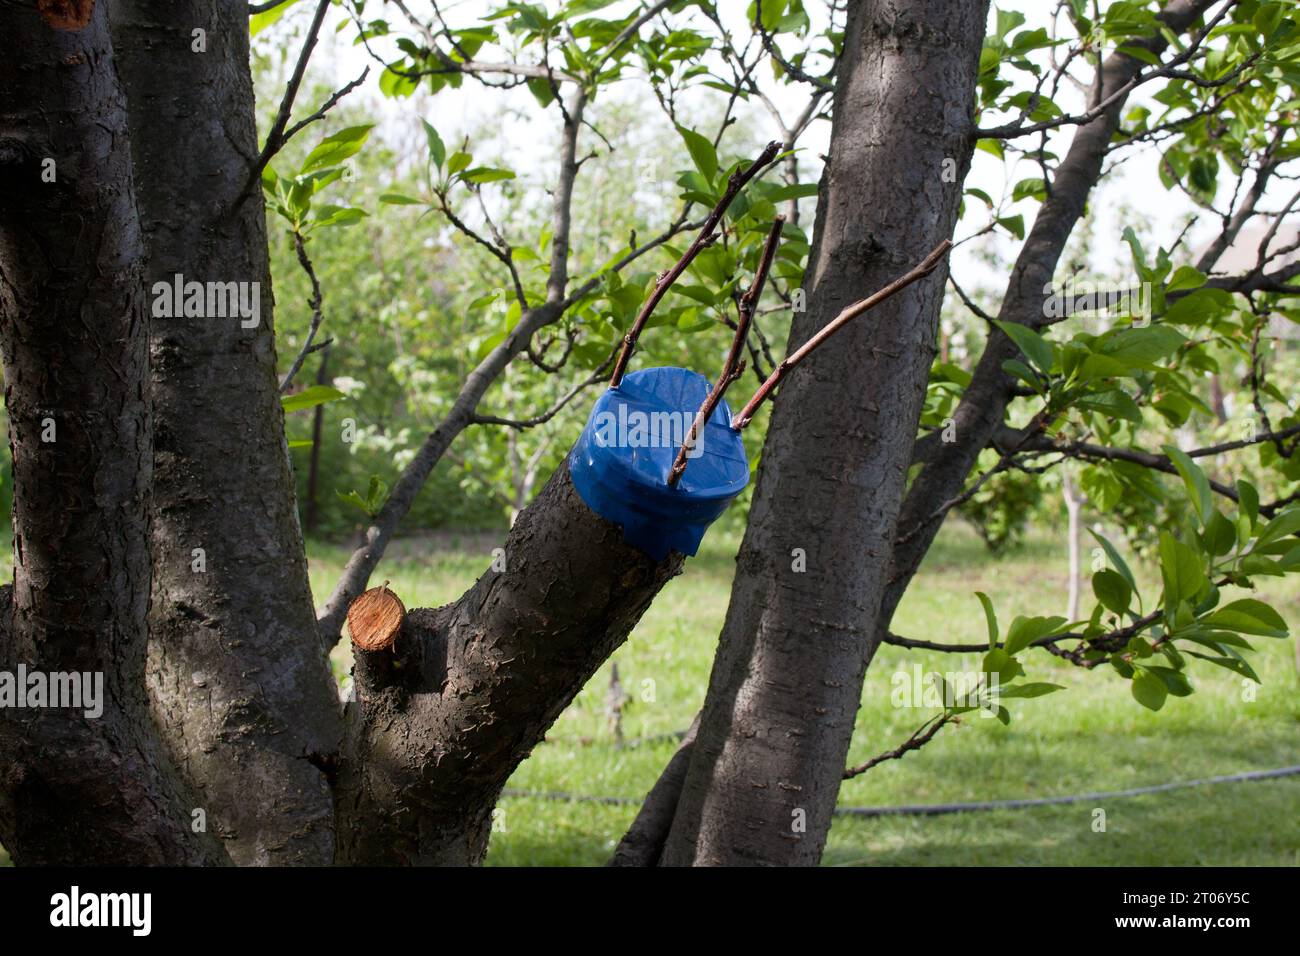 Tree grafting - Stock Image - E770/0967 - Science Photo Library